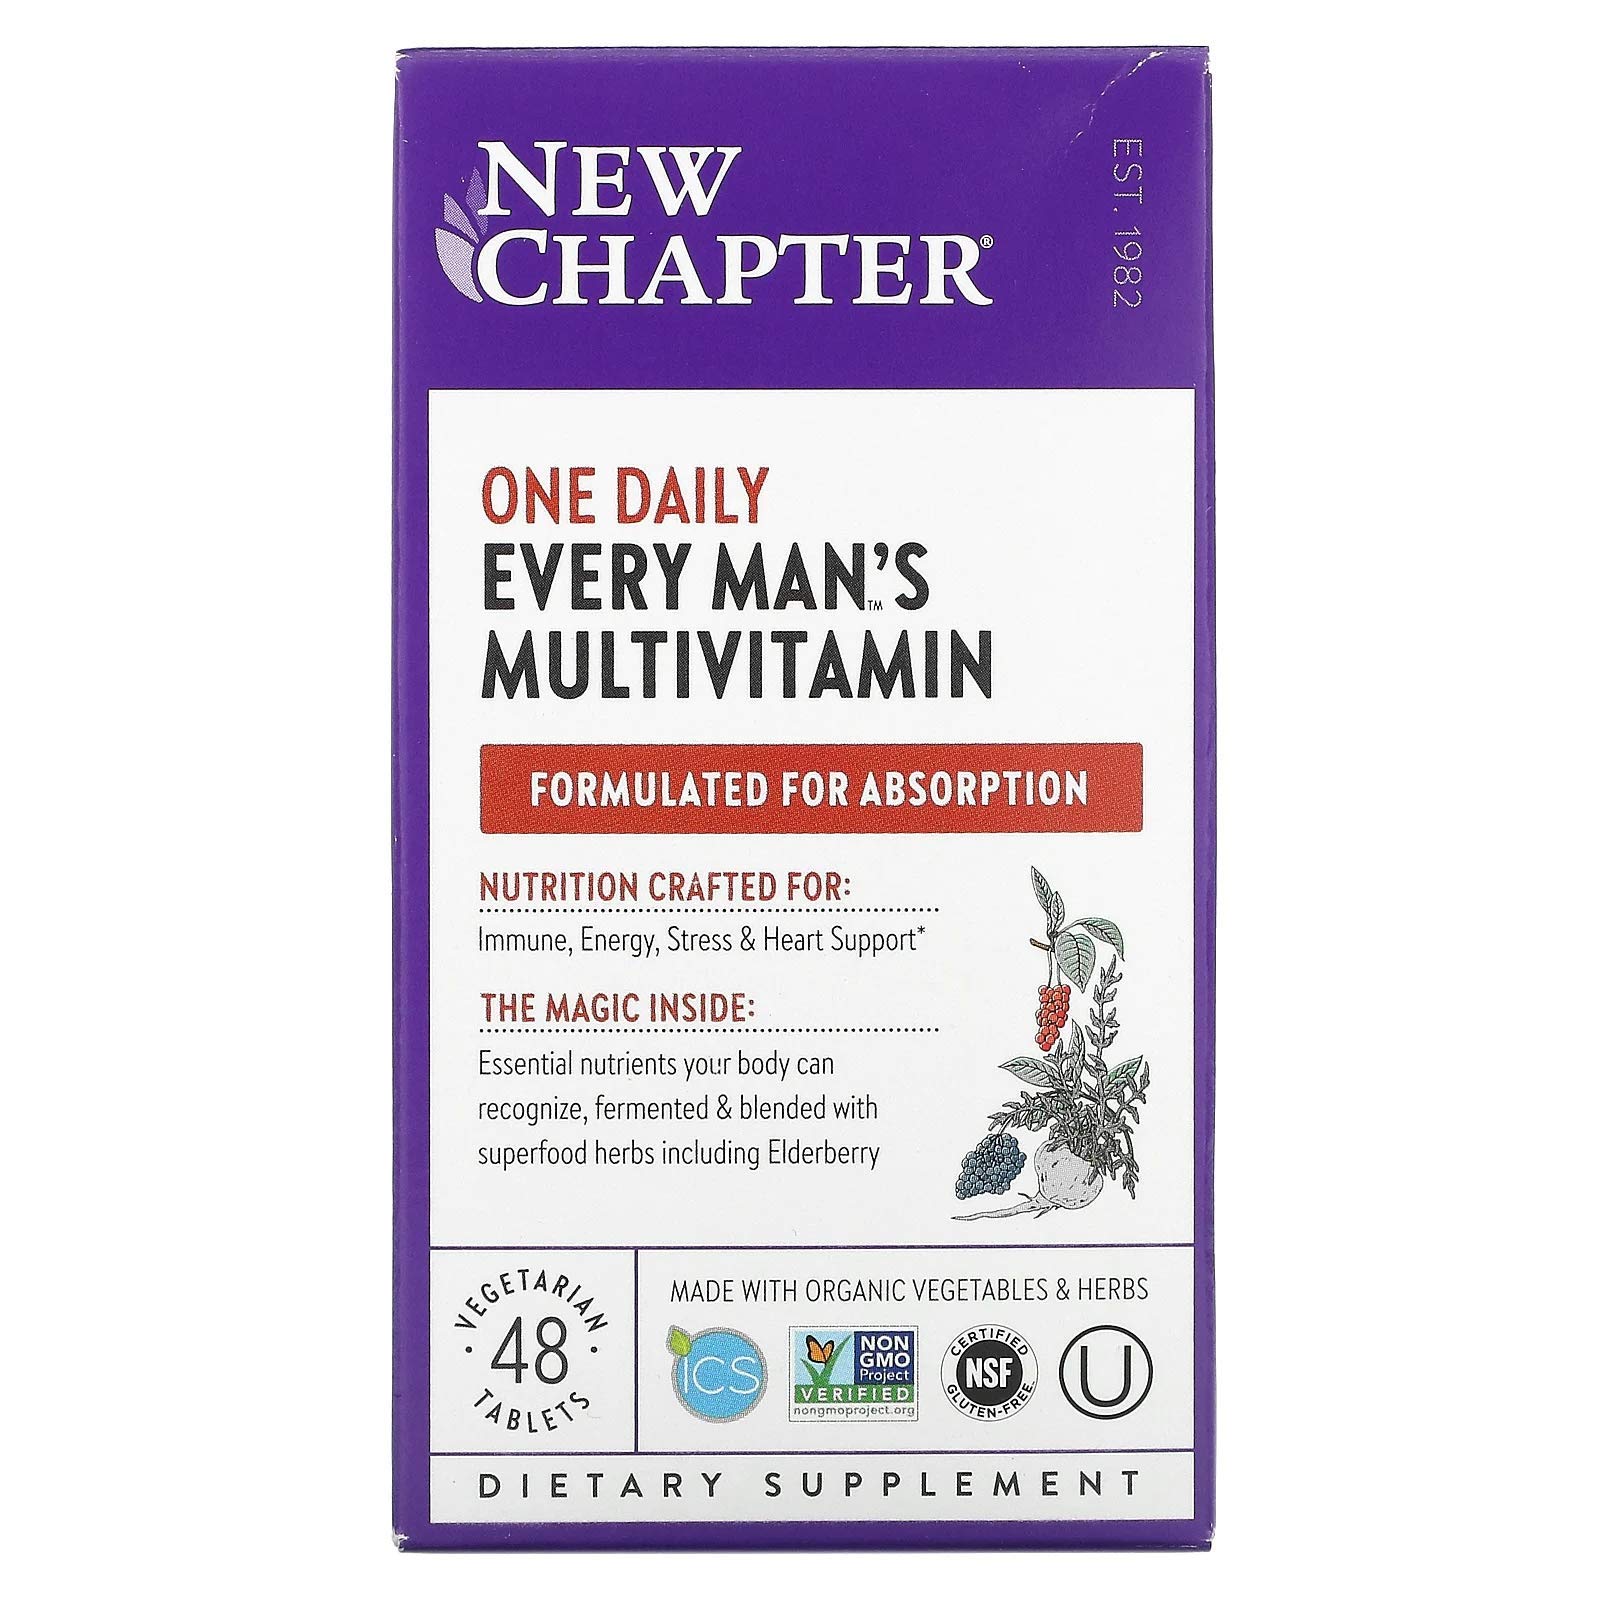 New Chapter Every Man's One Daily Multivitamin, Whole Food multivitamin for Men 2 x 48 Pack